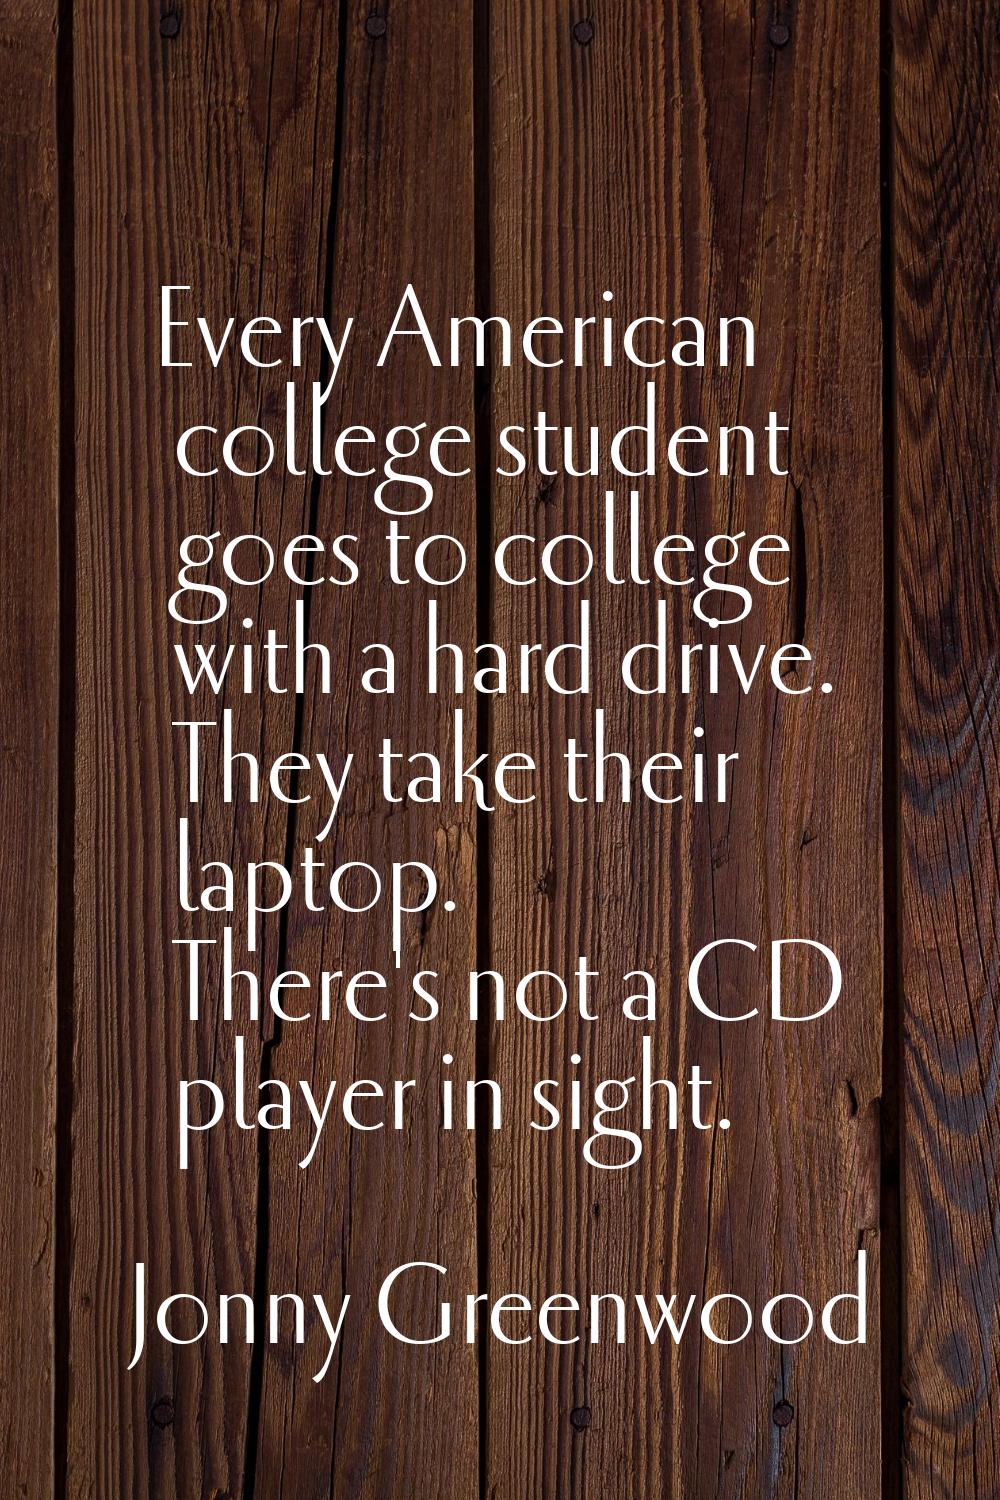 Every American college student goes to college with a hard drive. They take their laptop. There's n